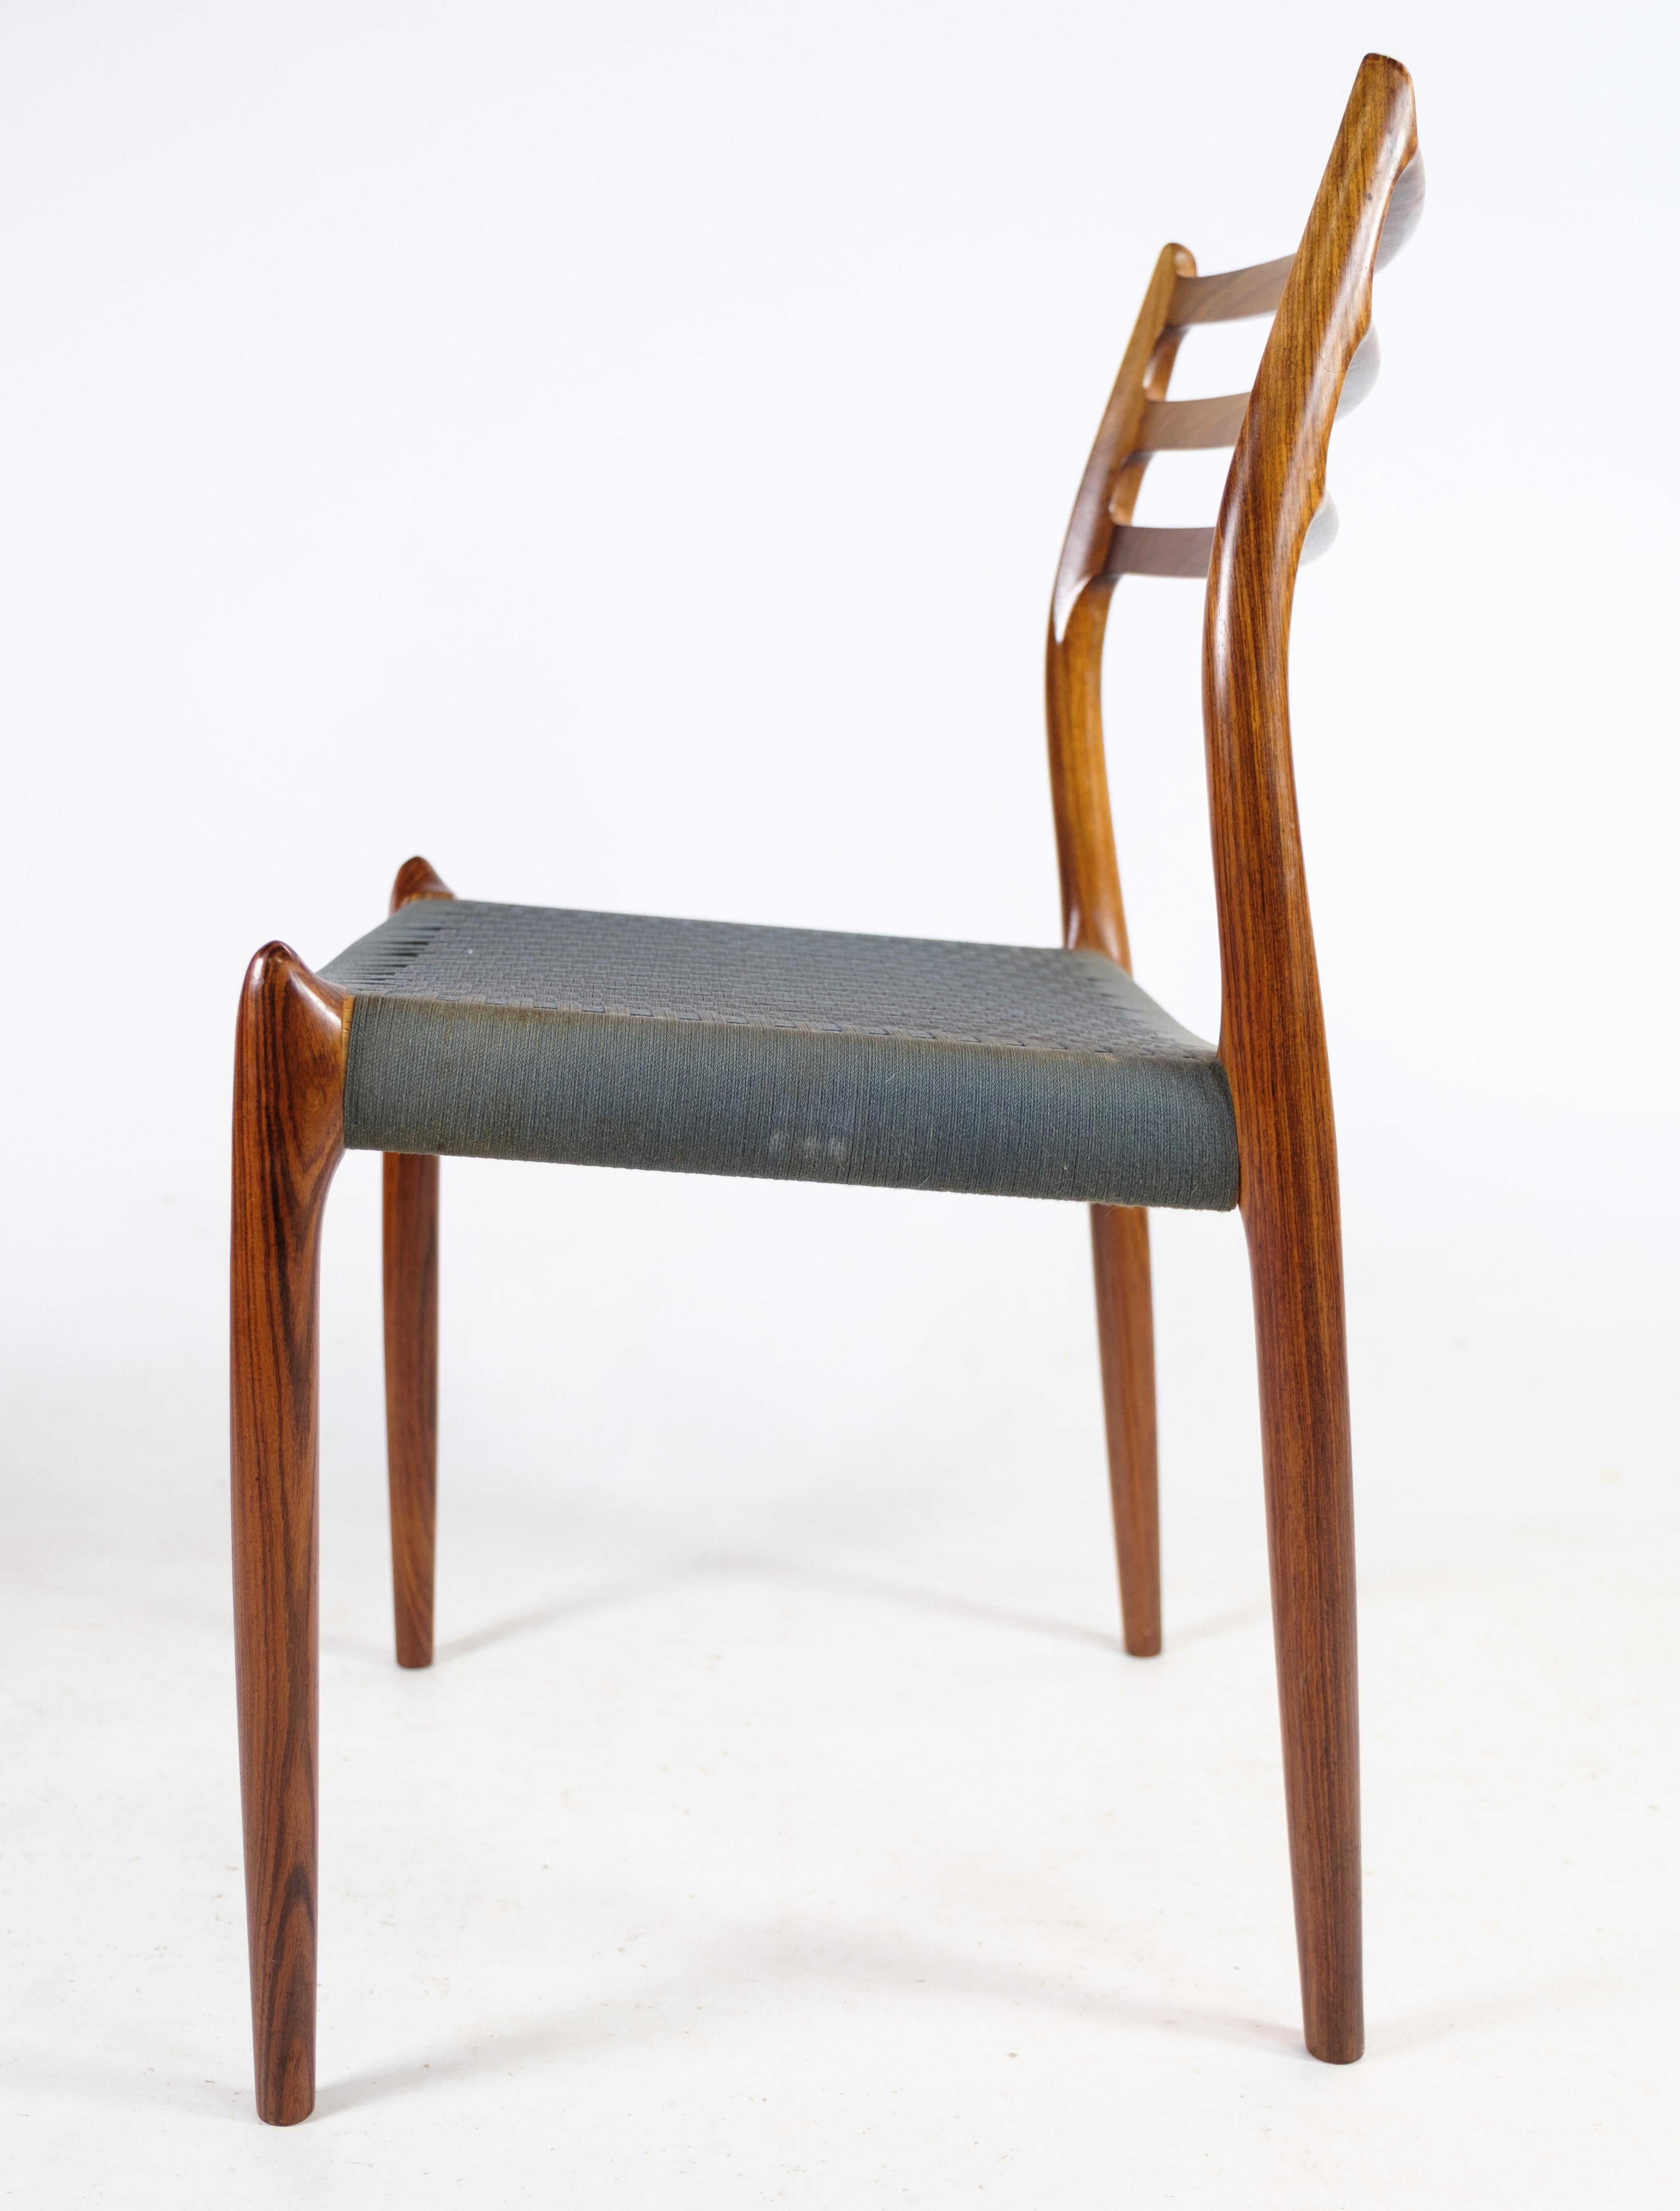 8 Dining Room Chairs Model No 78 Made In Rosewood By Niels O. Møller From 1960s In Excellent Condition For Sale In Lejre, DK